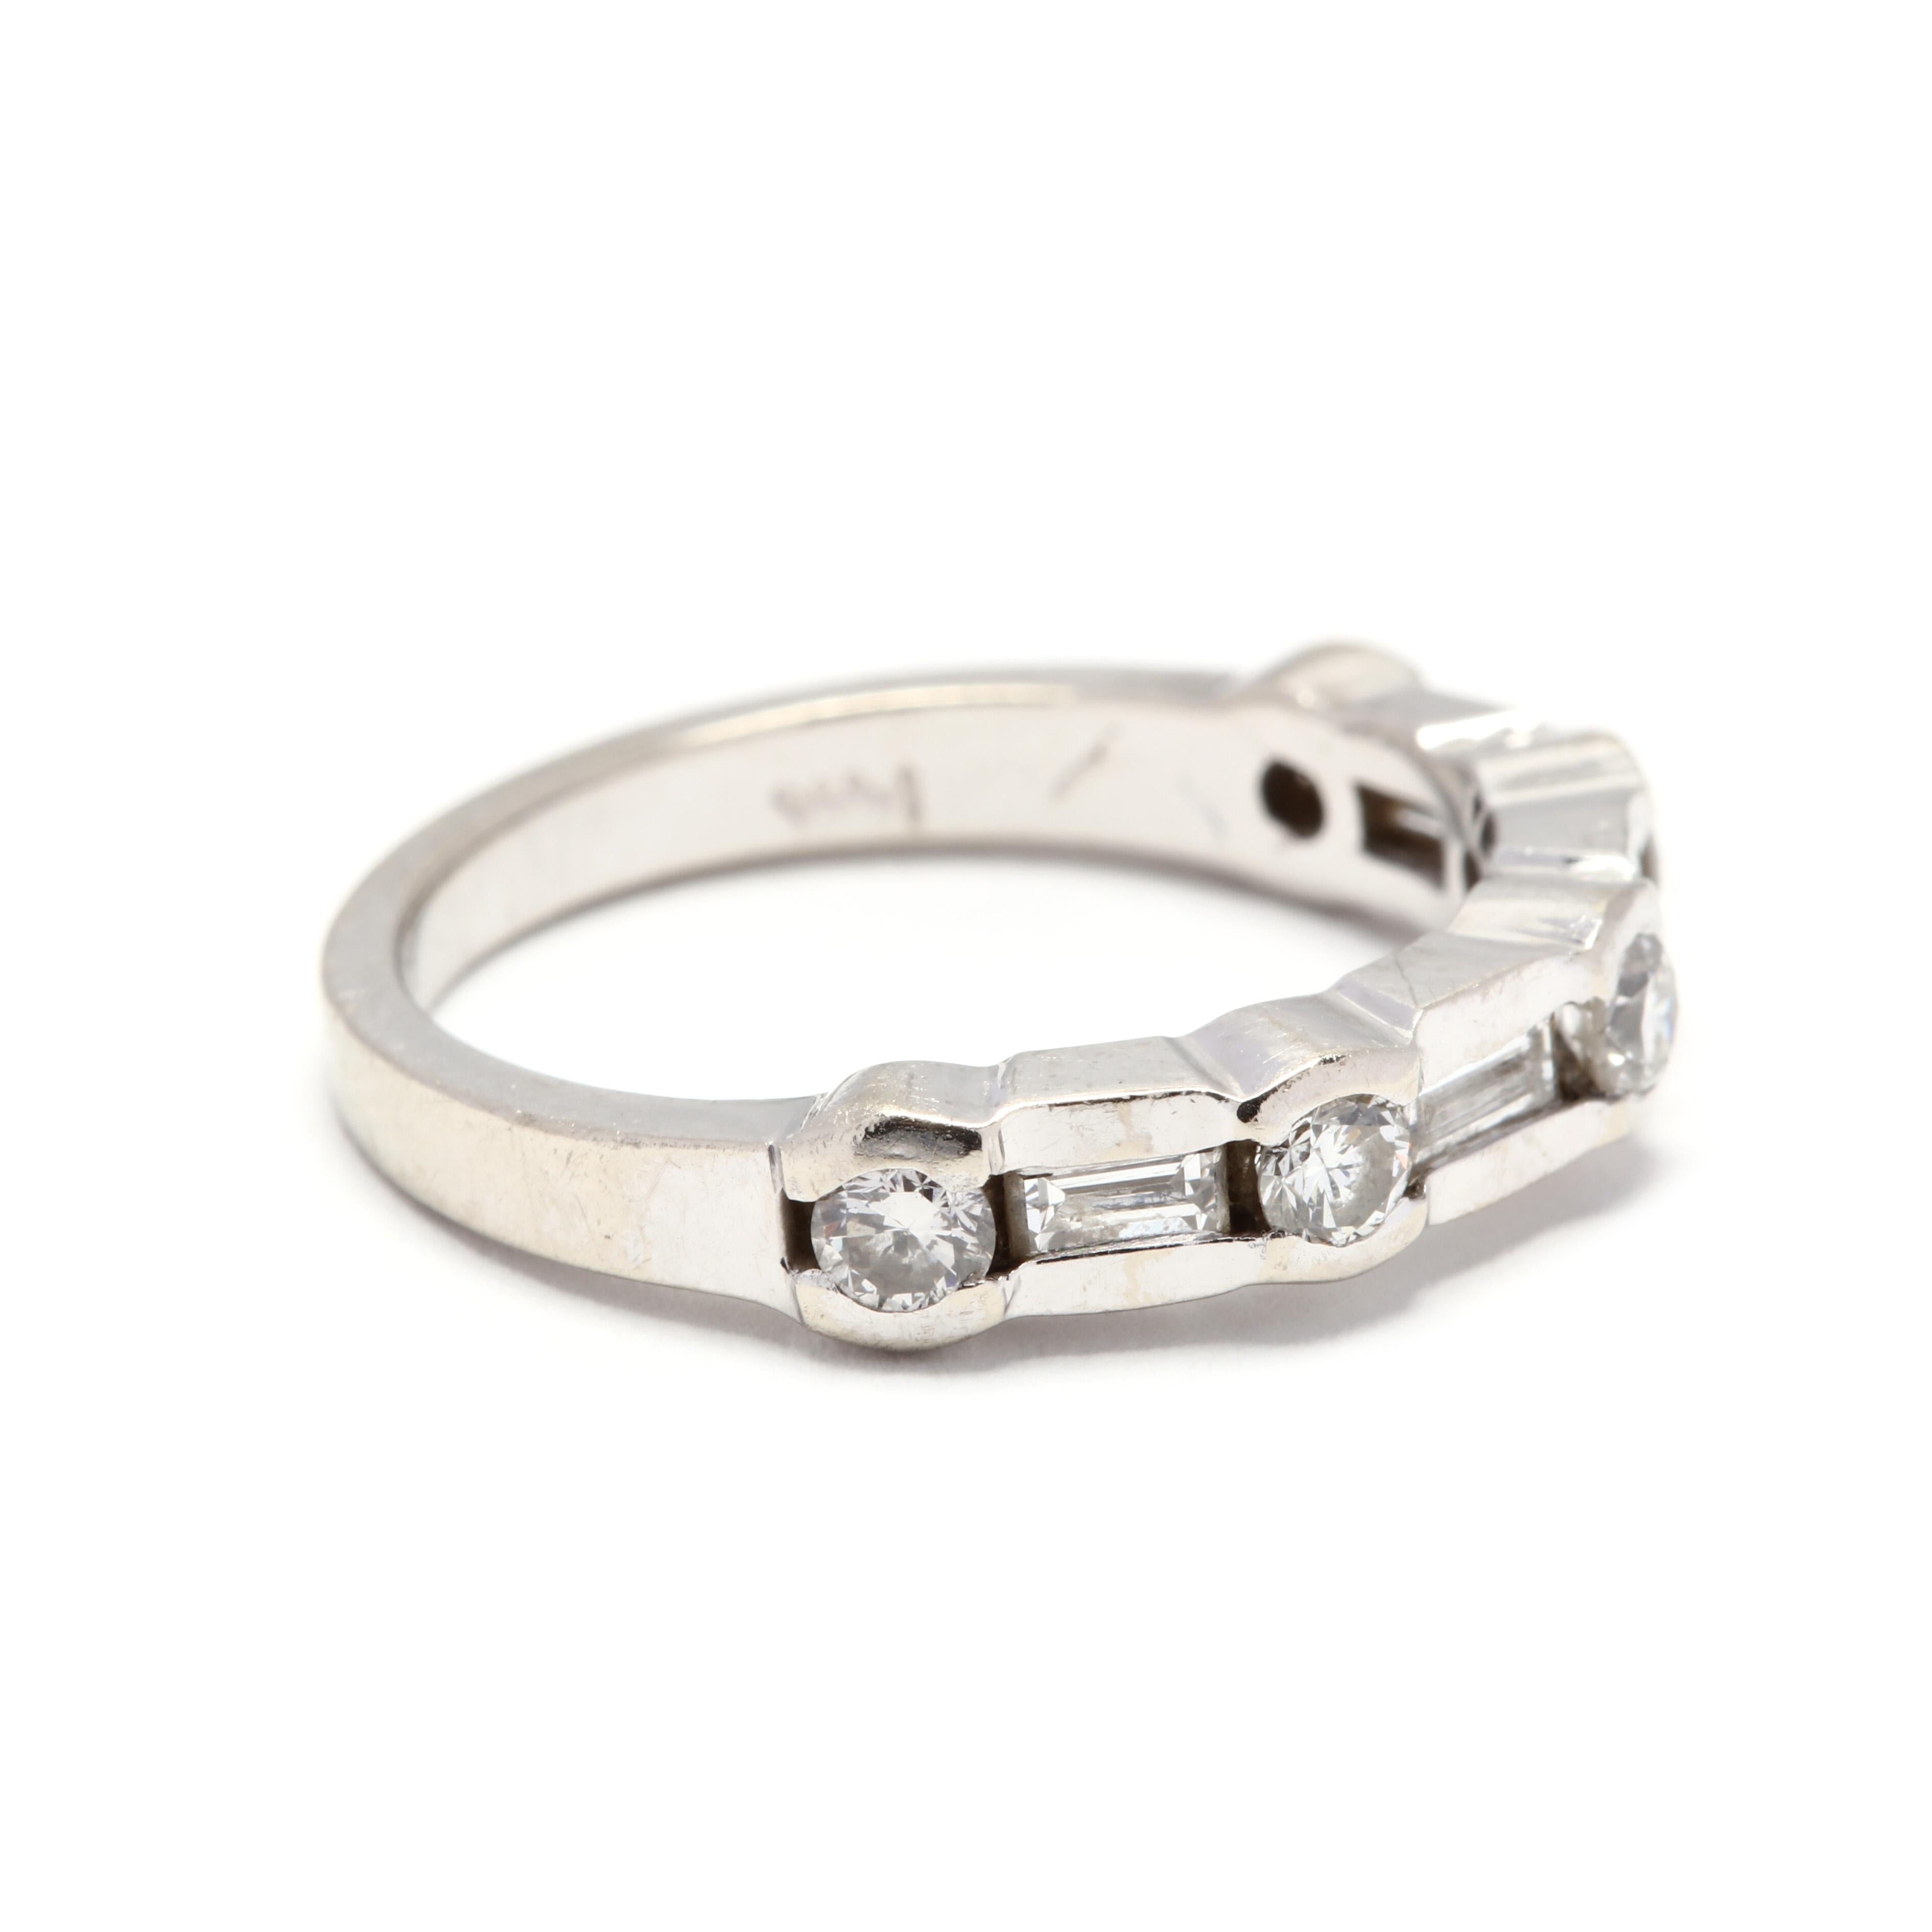 A 14 karat white gold round and baguette cut diamond stackable band ring. This ring features alternating, channel set round brilliant cut diamonds weighing approximately .55 total carats and baguette cut diamonds weighing approximately .44 total